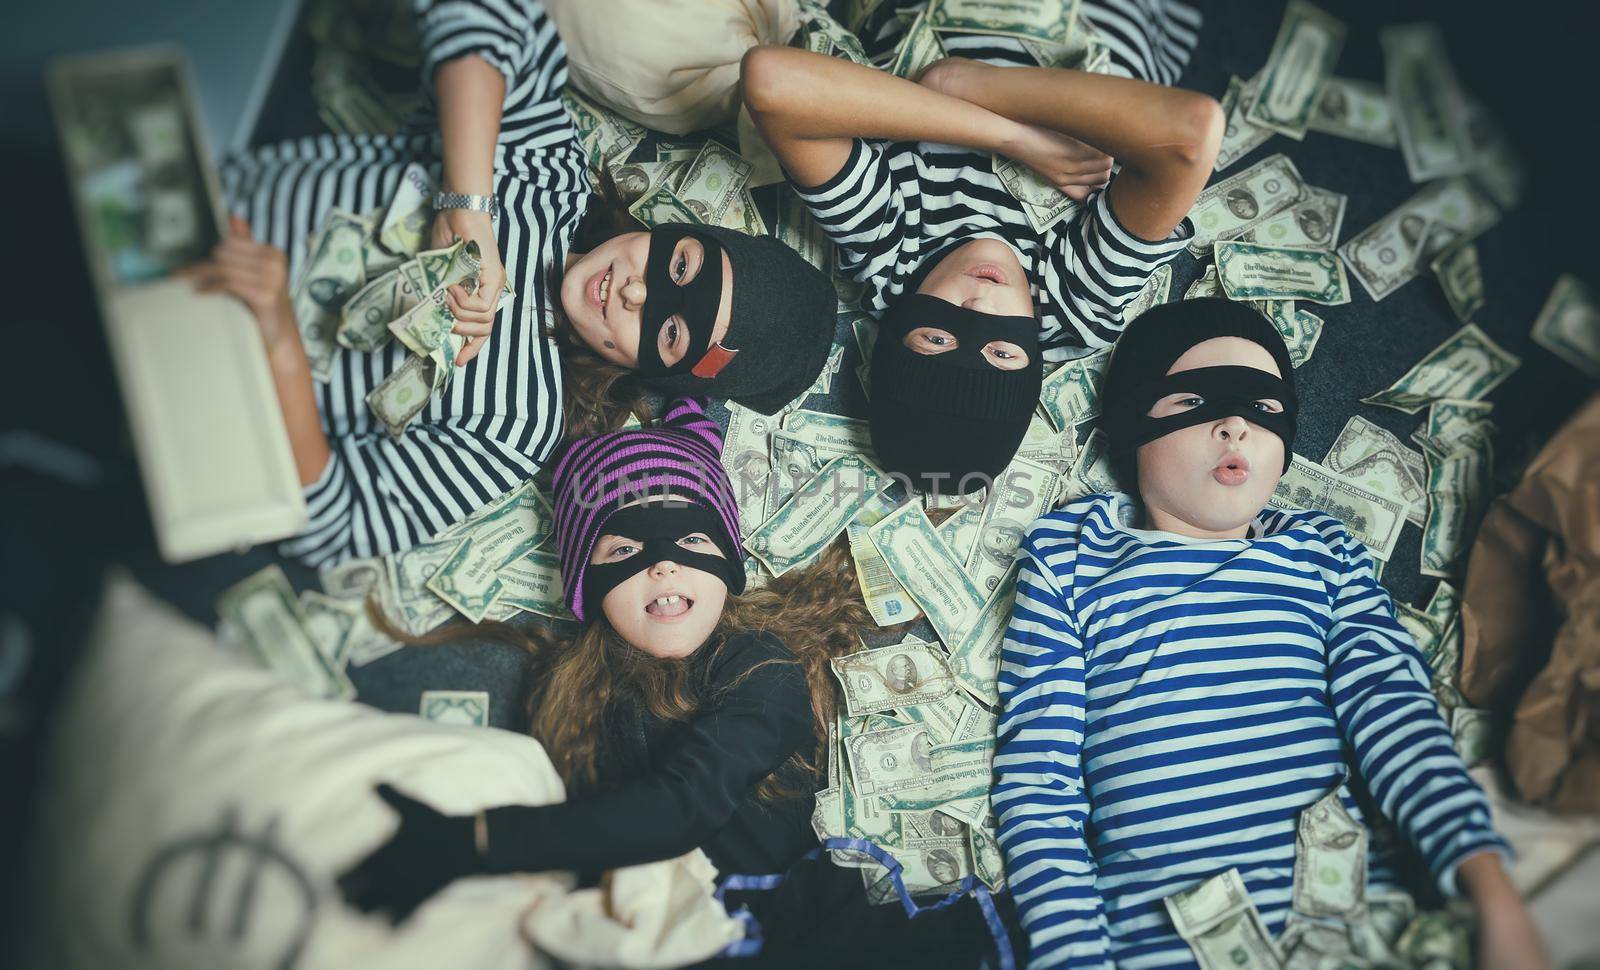 children's Bank robbery by Rotozey